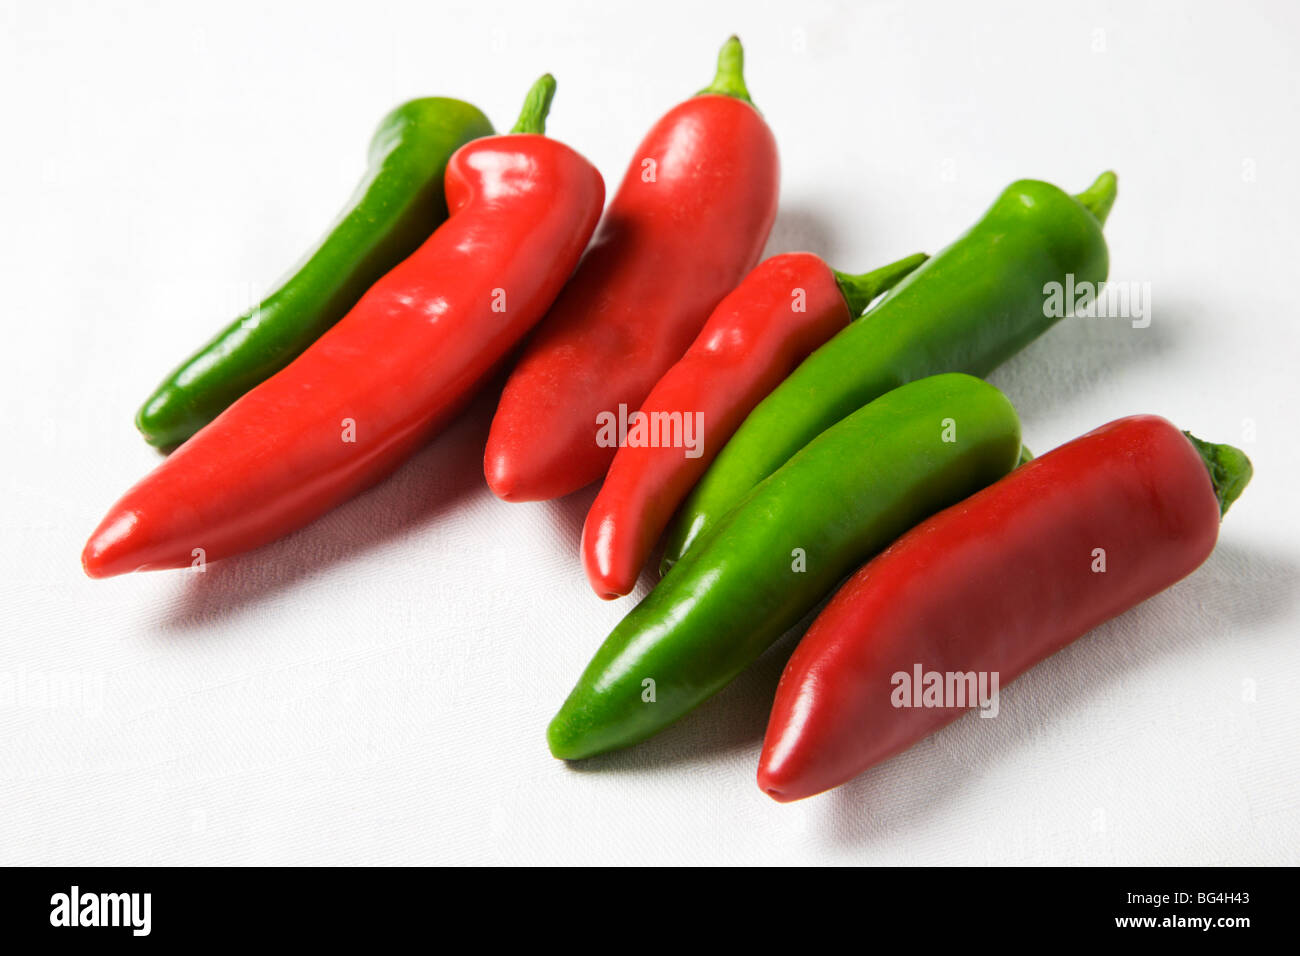 Red and Green Chili Peppers on a White Background Stock Photo